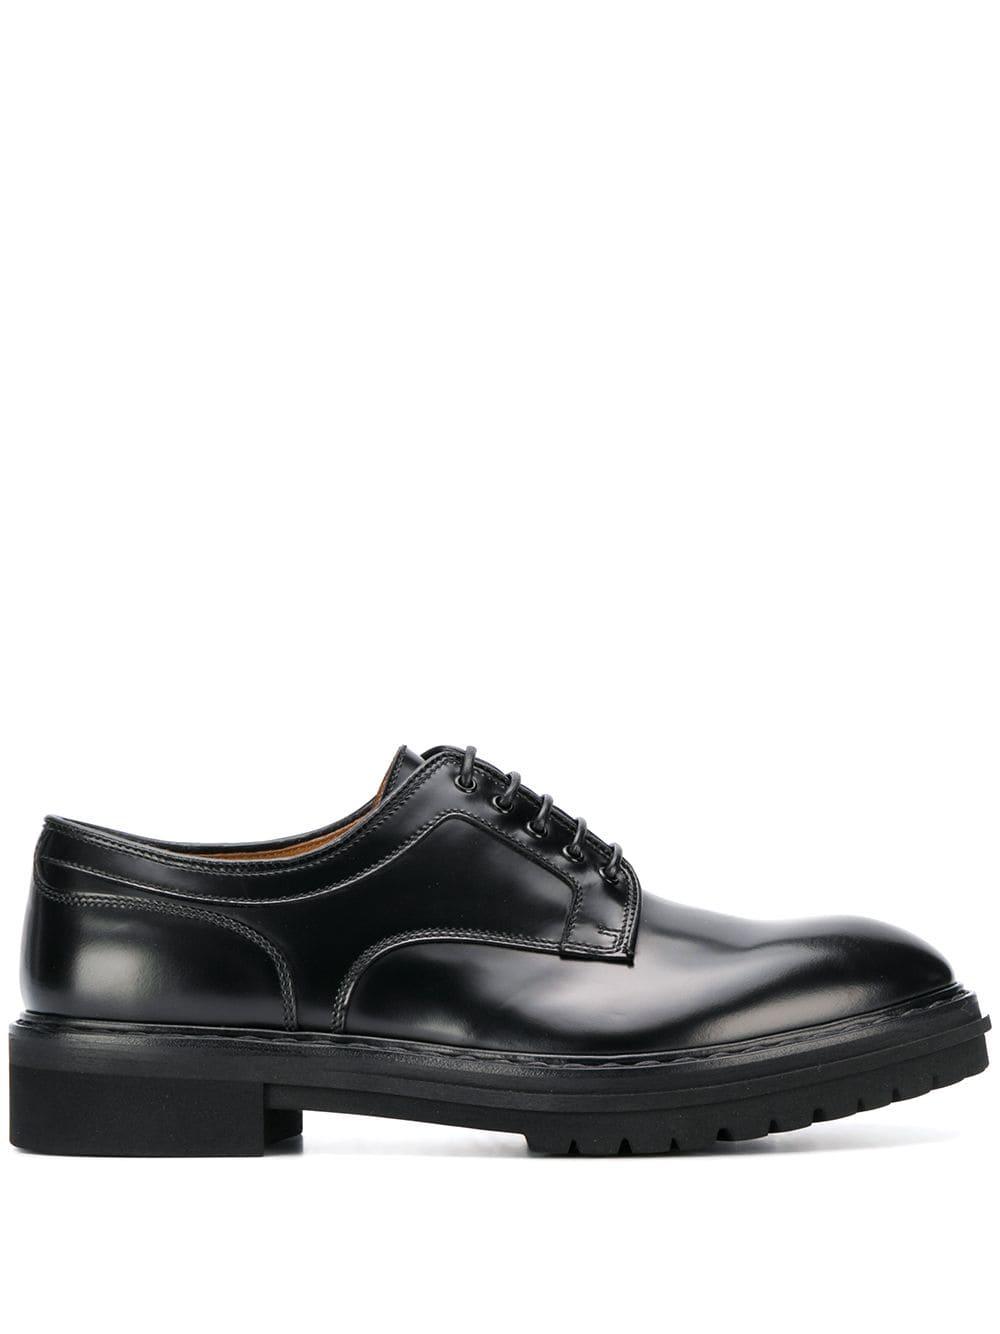 Premiata Leather Chunky Derby Shoes in Black for Men - Lyst